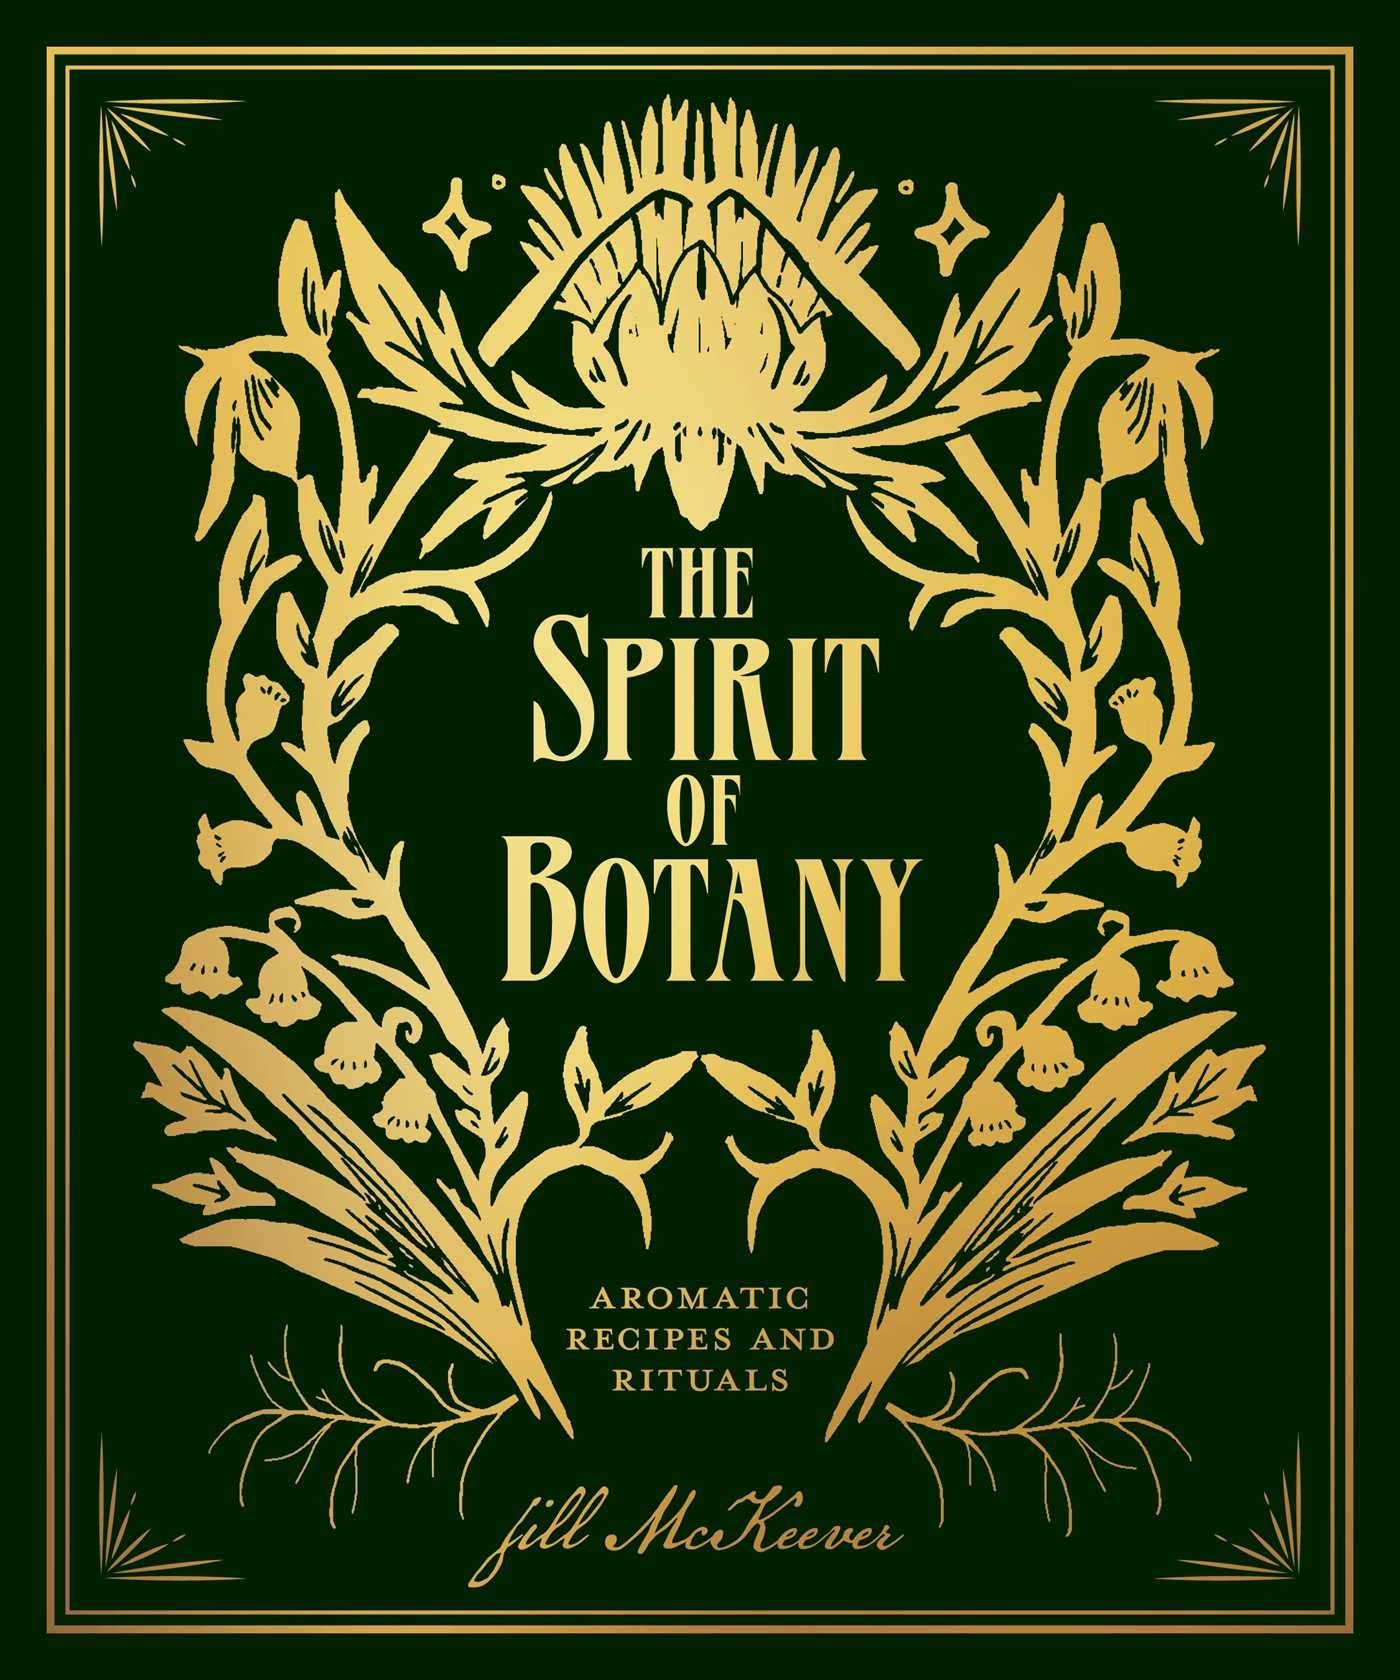 The Spirit of Botany: Aromatic Recipes and Rituals (Jill McKeever)